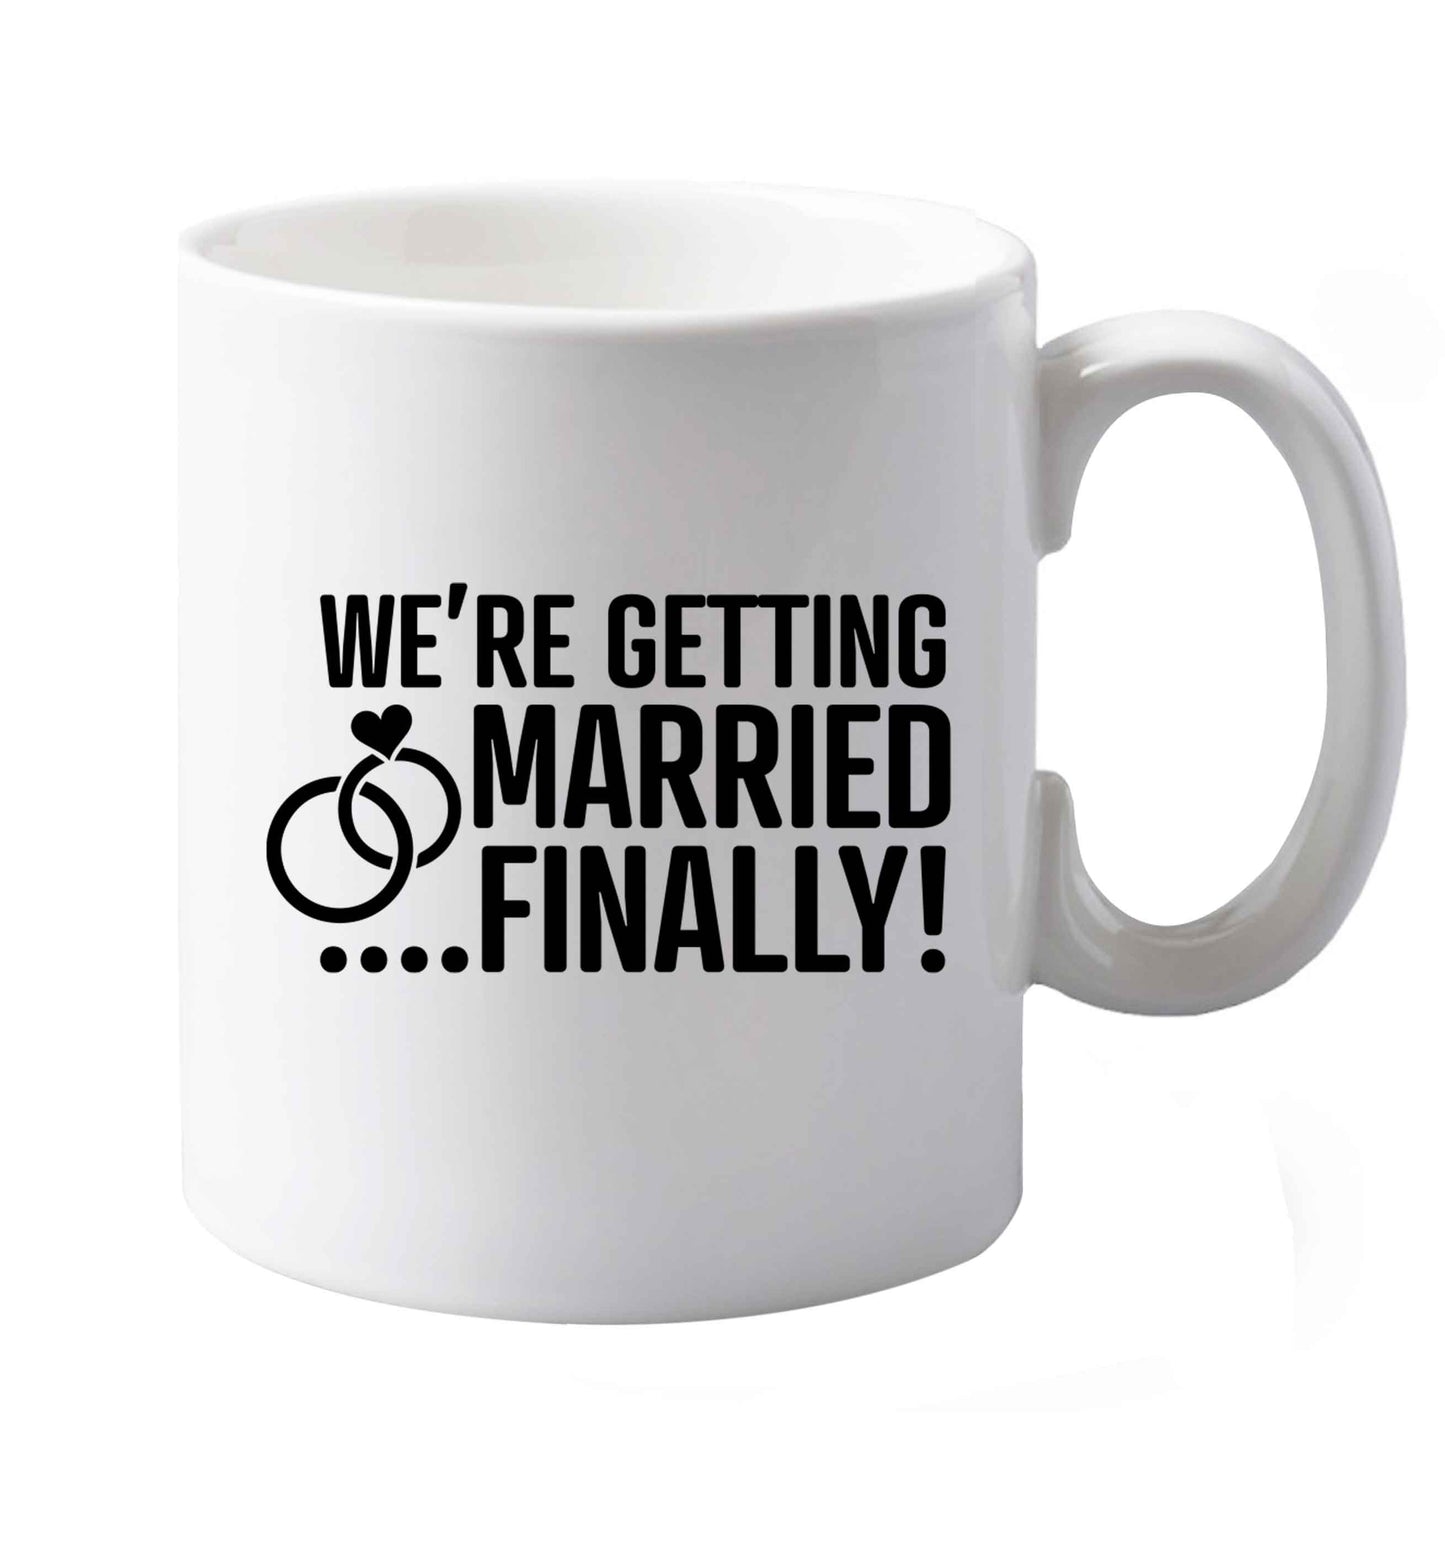 10 oz It's been a long wait but it's finally happening! Let everyone know you're celebrating your big day soon!   ceramic mug both sides